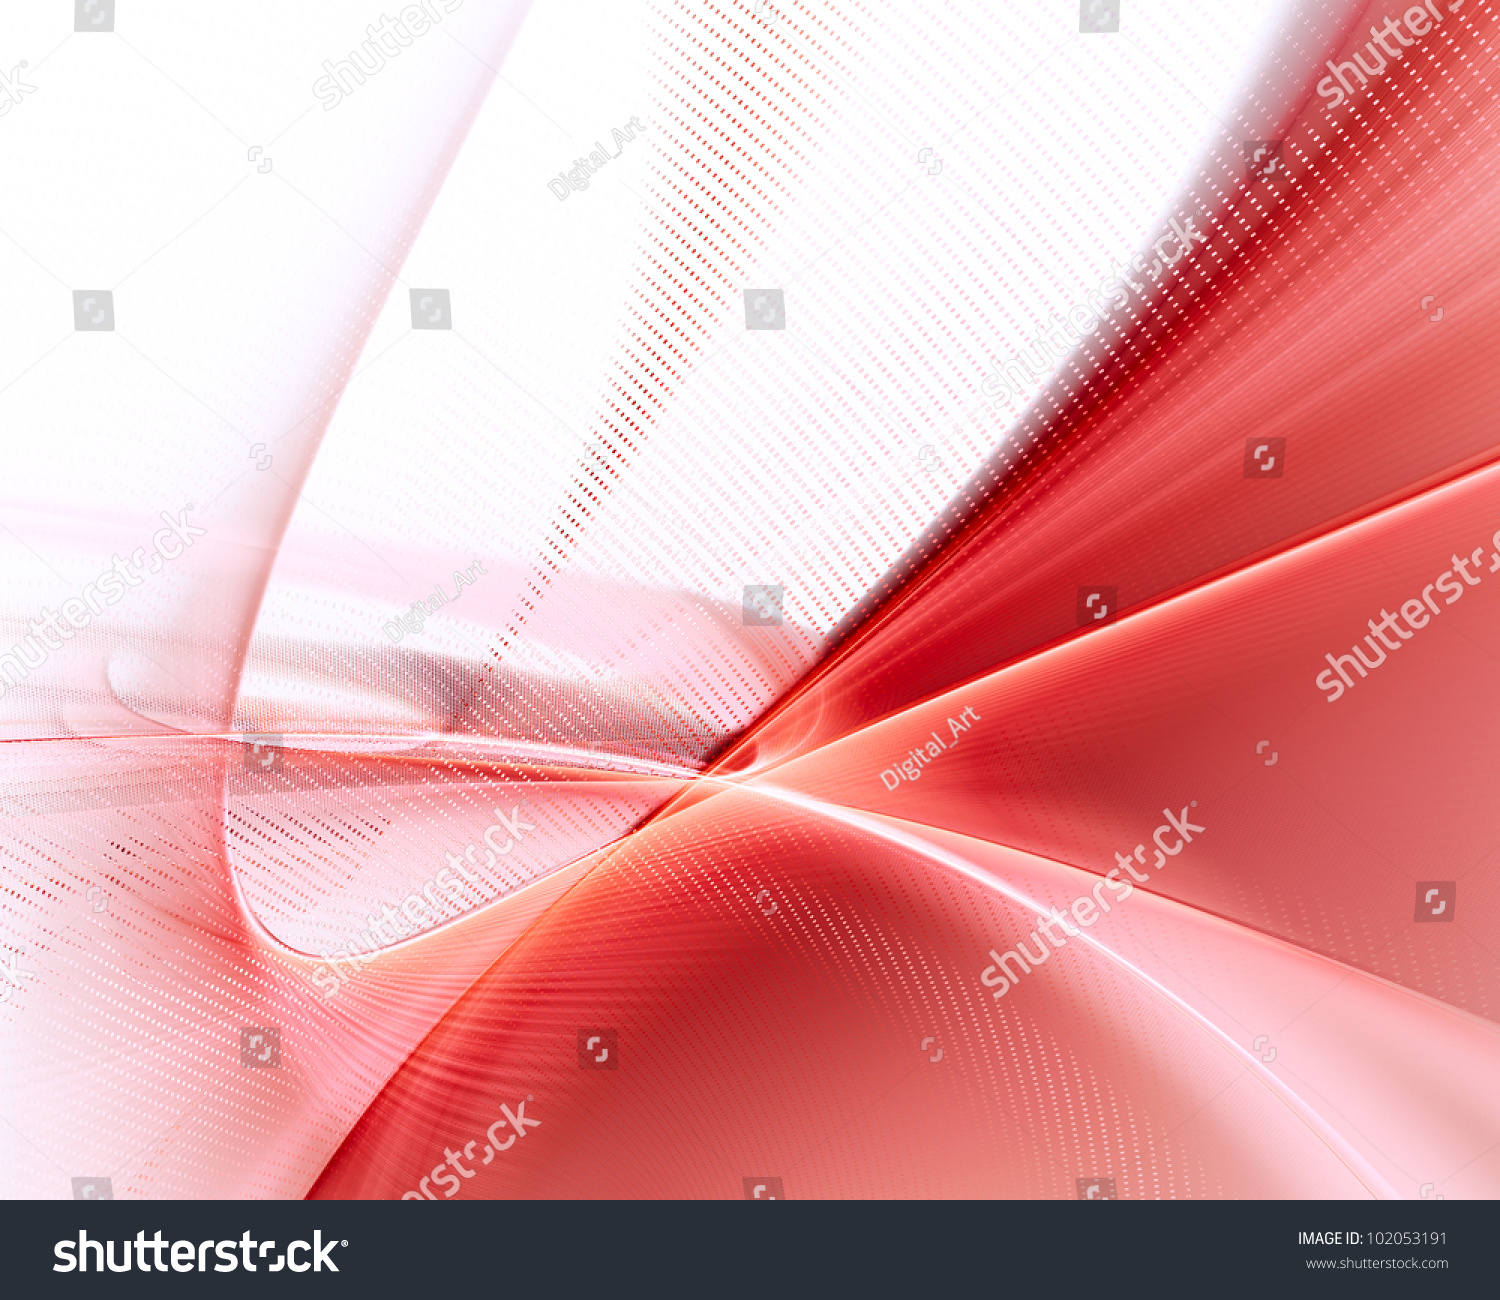 Abstract Red And White Background Stock Photo 102053191 : Shutterstock